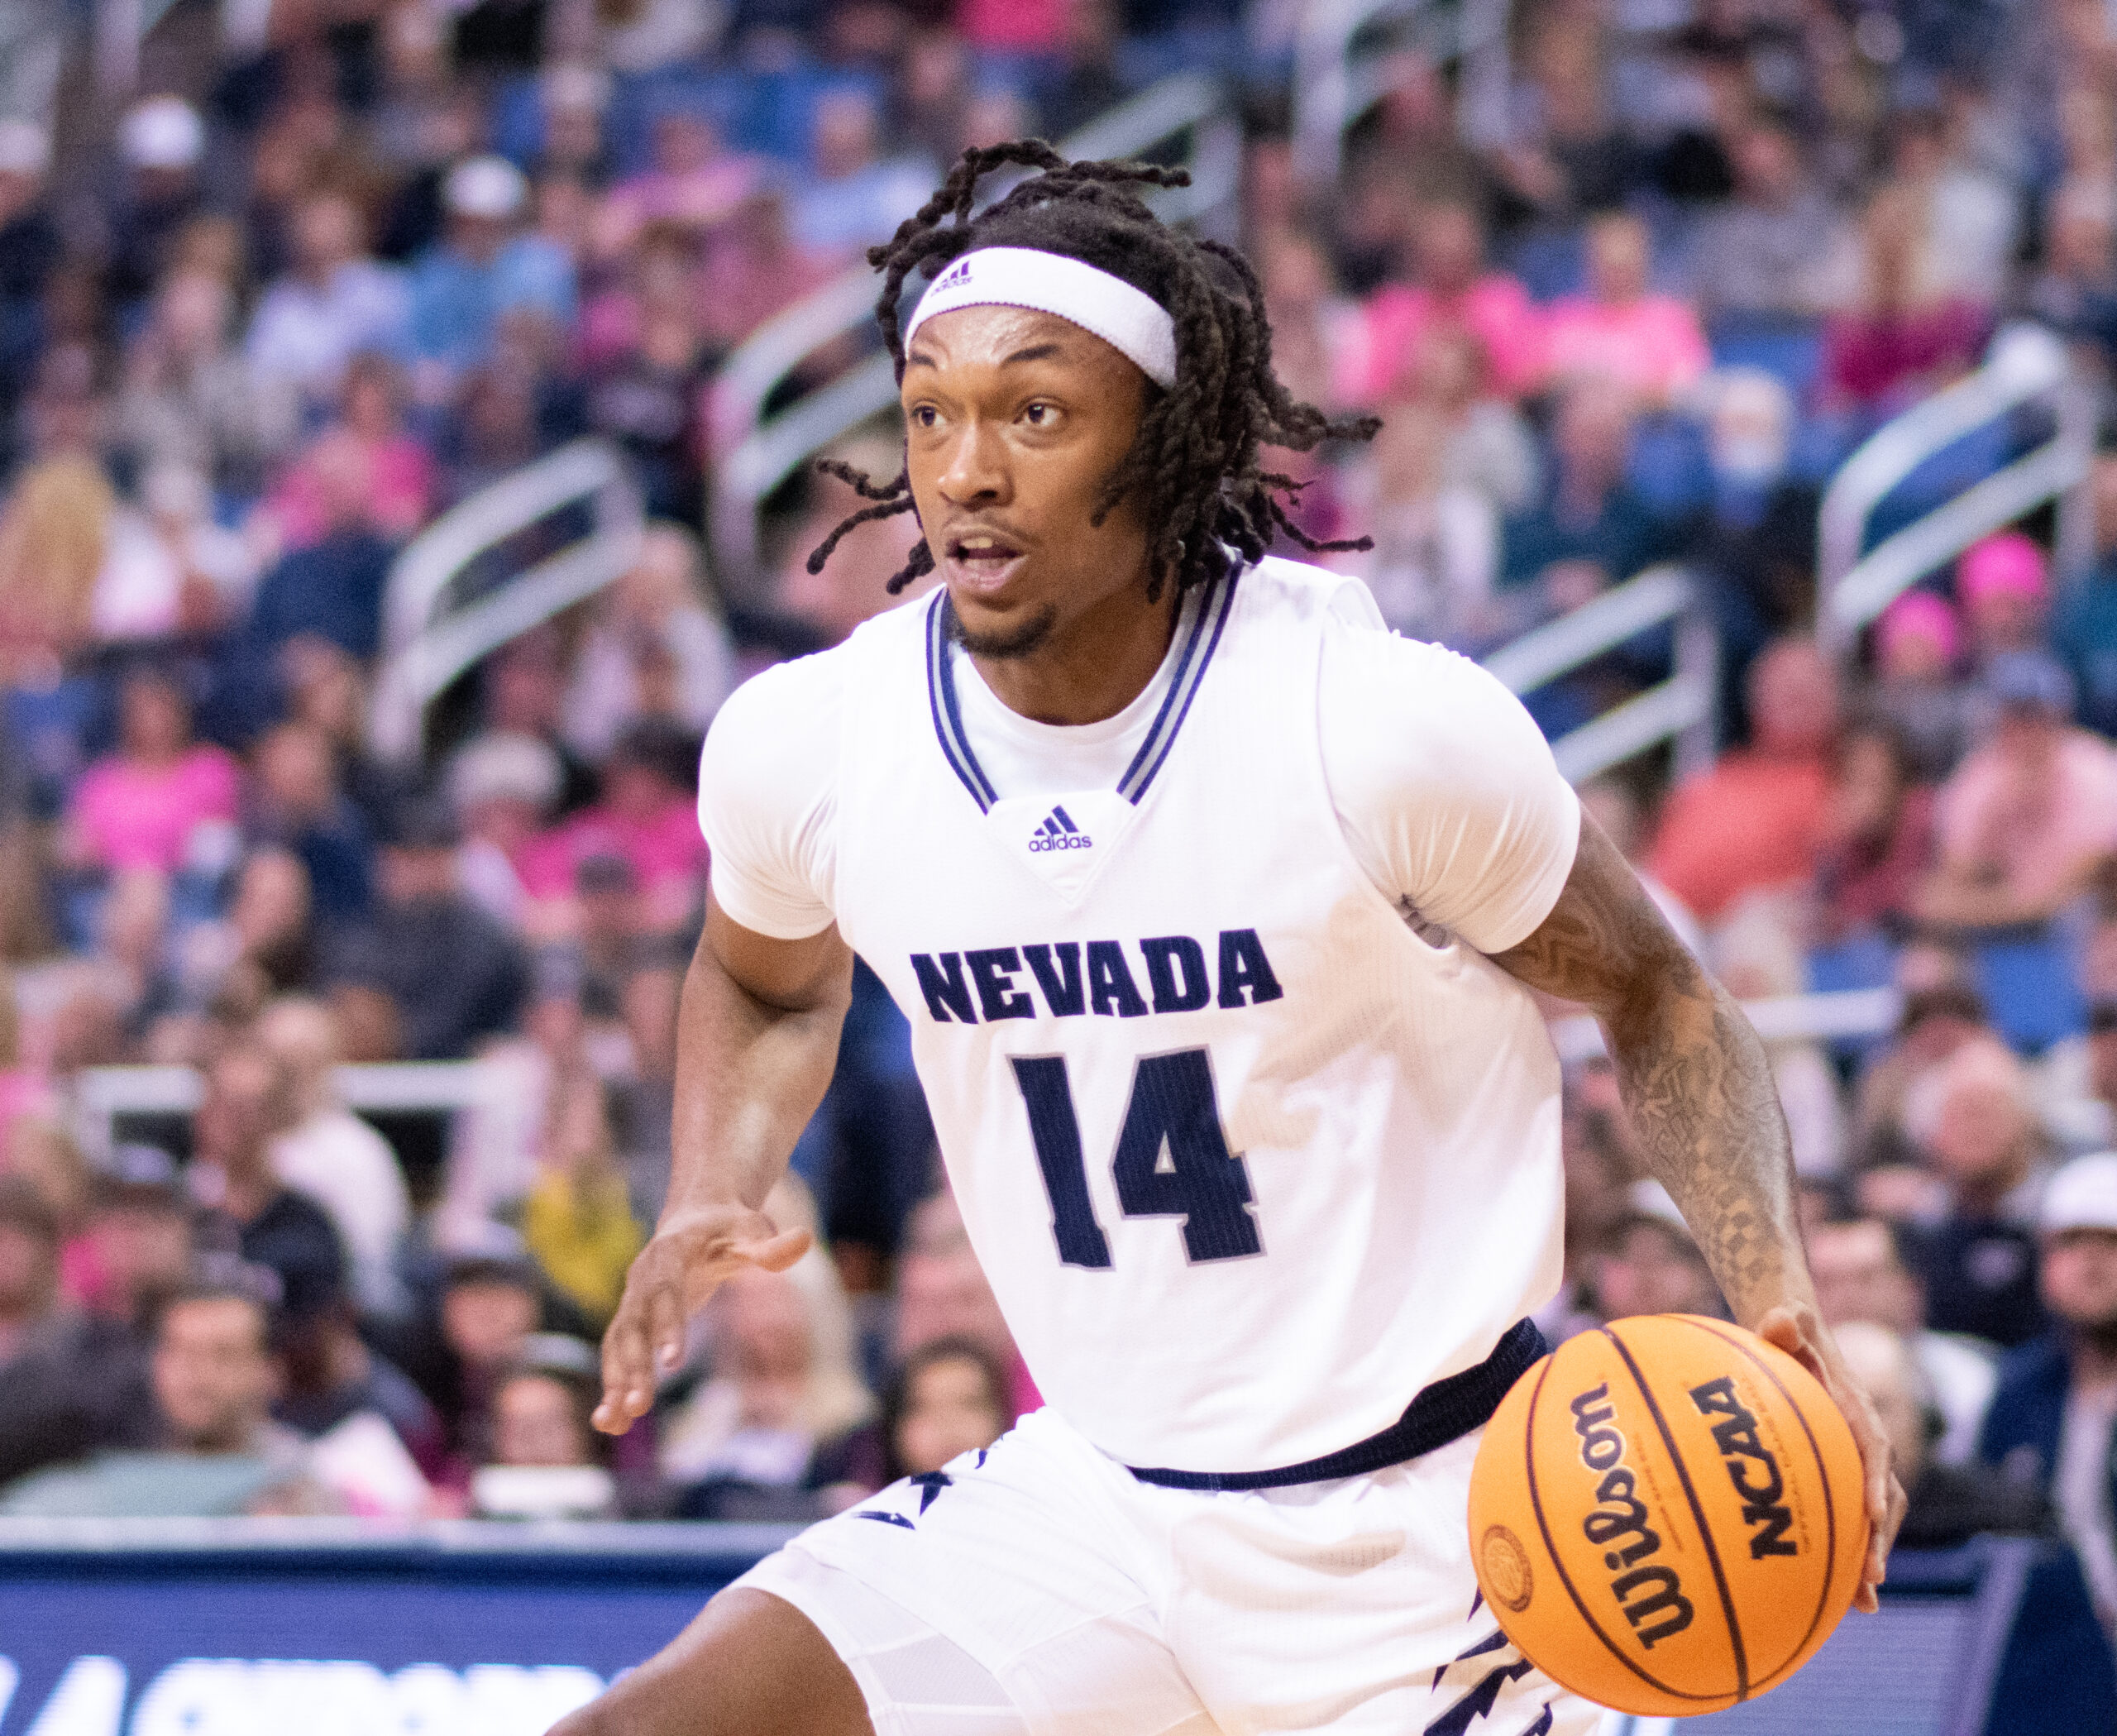 Men’s Basketball beats New Mexico 77-76 in tight conference game